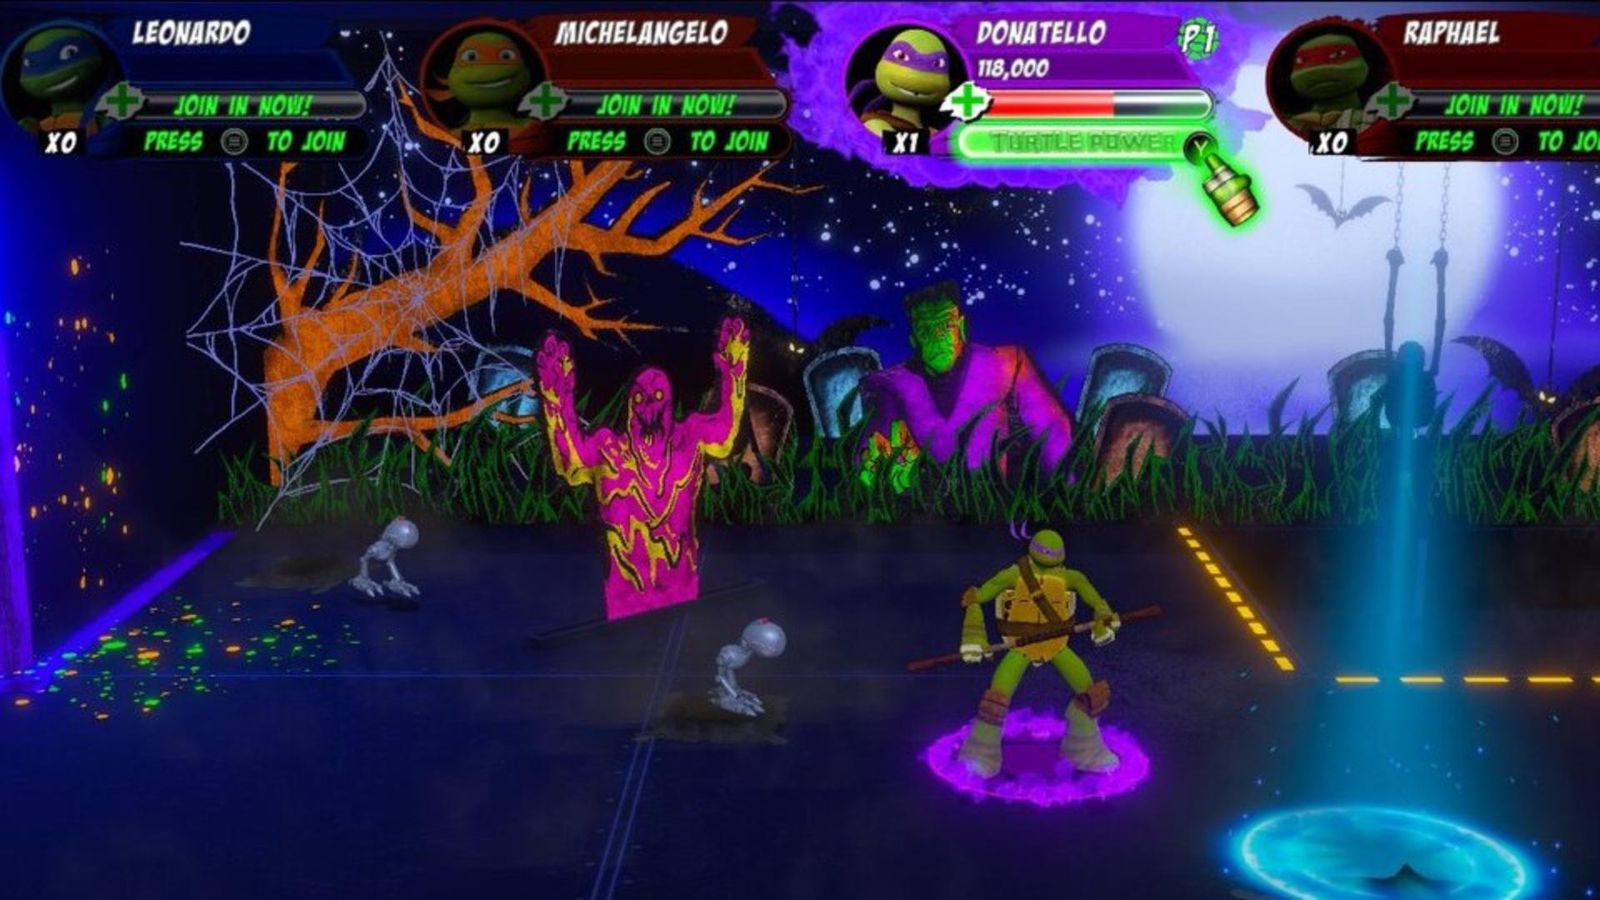 Donatello faces foes in TMNT Arcade: Wrath of the Mutants